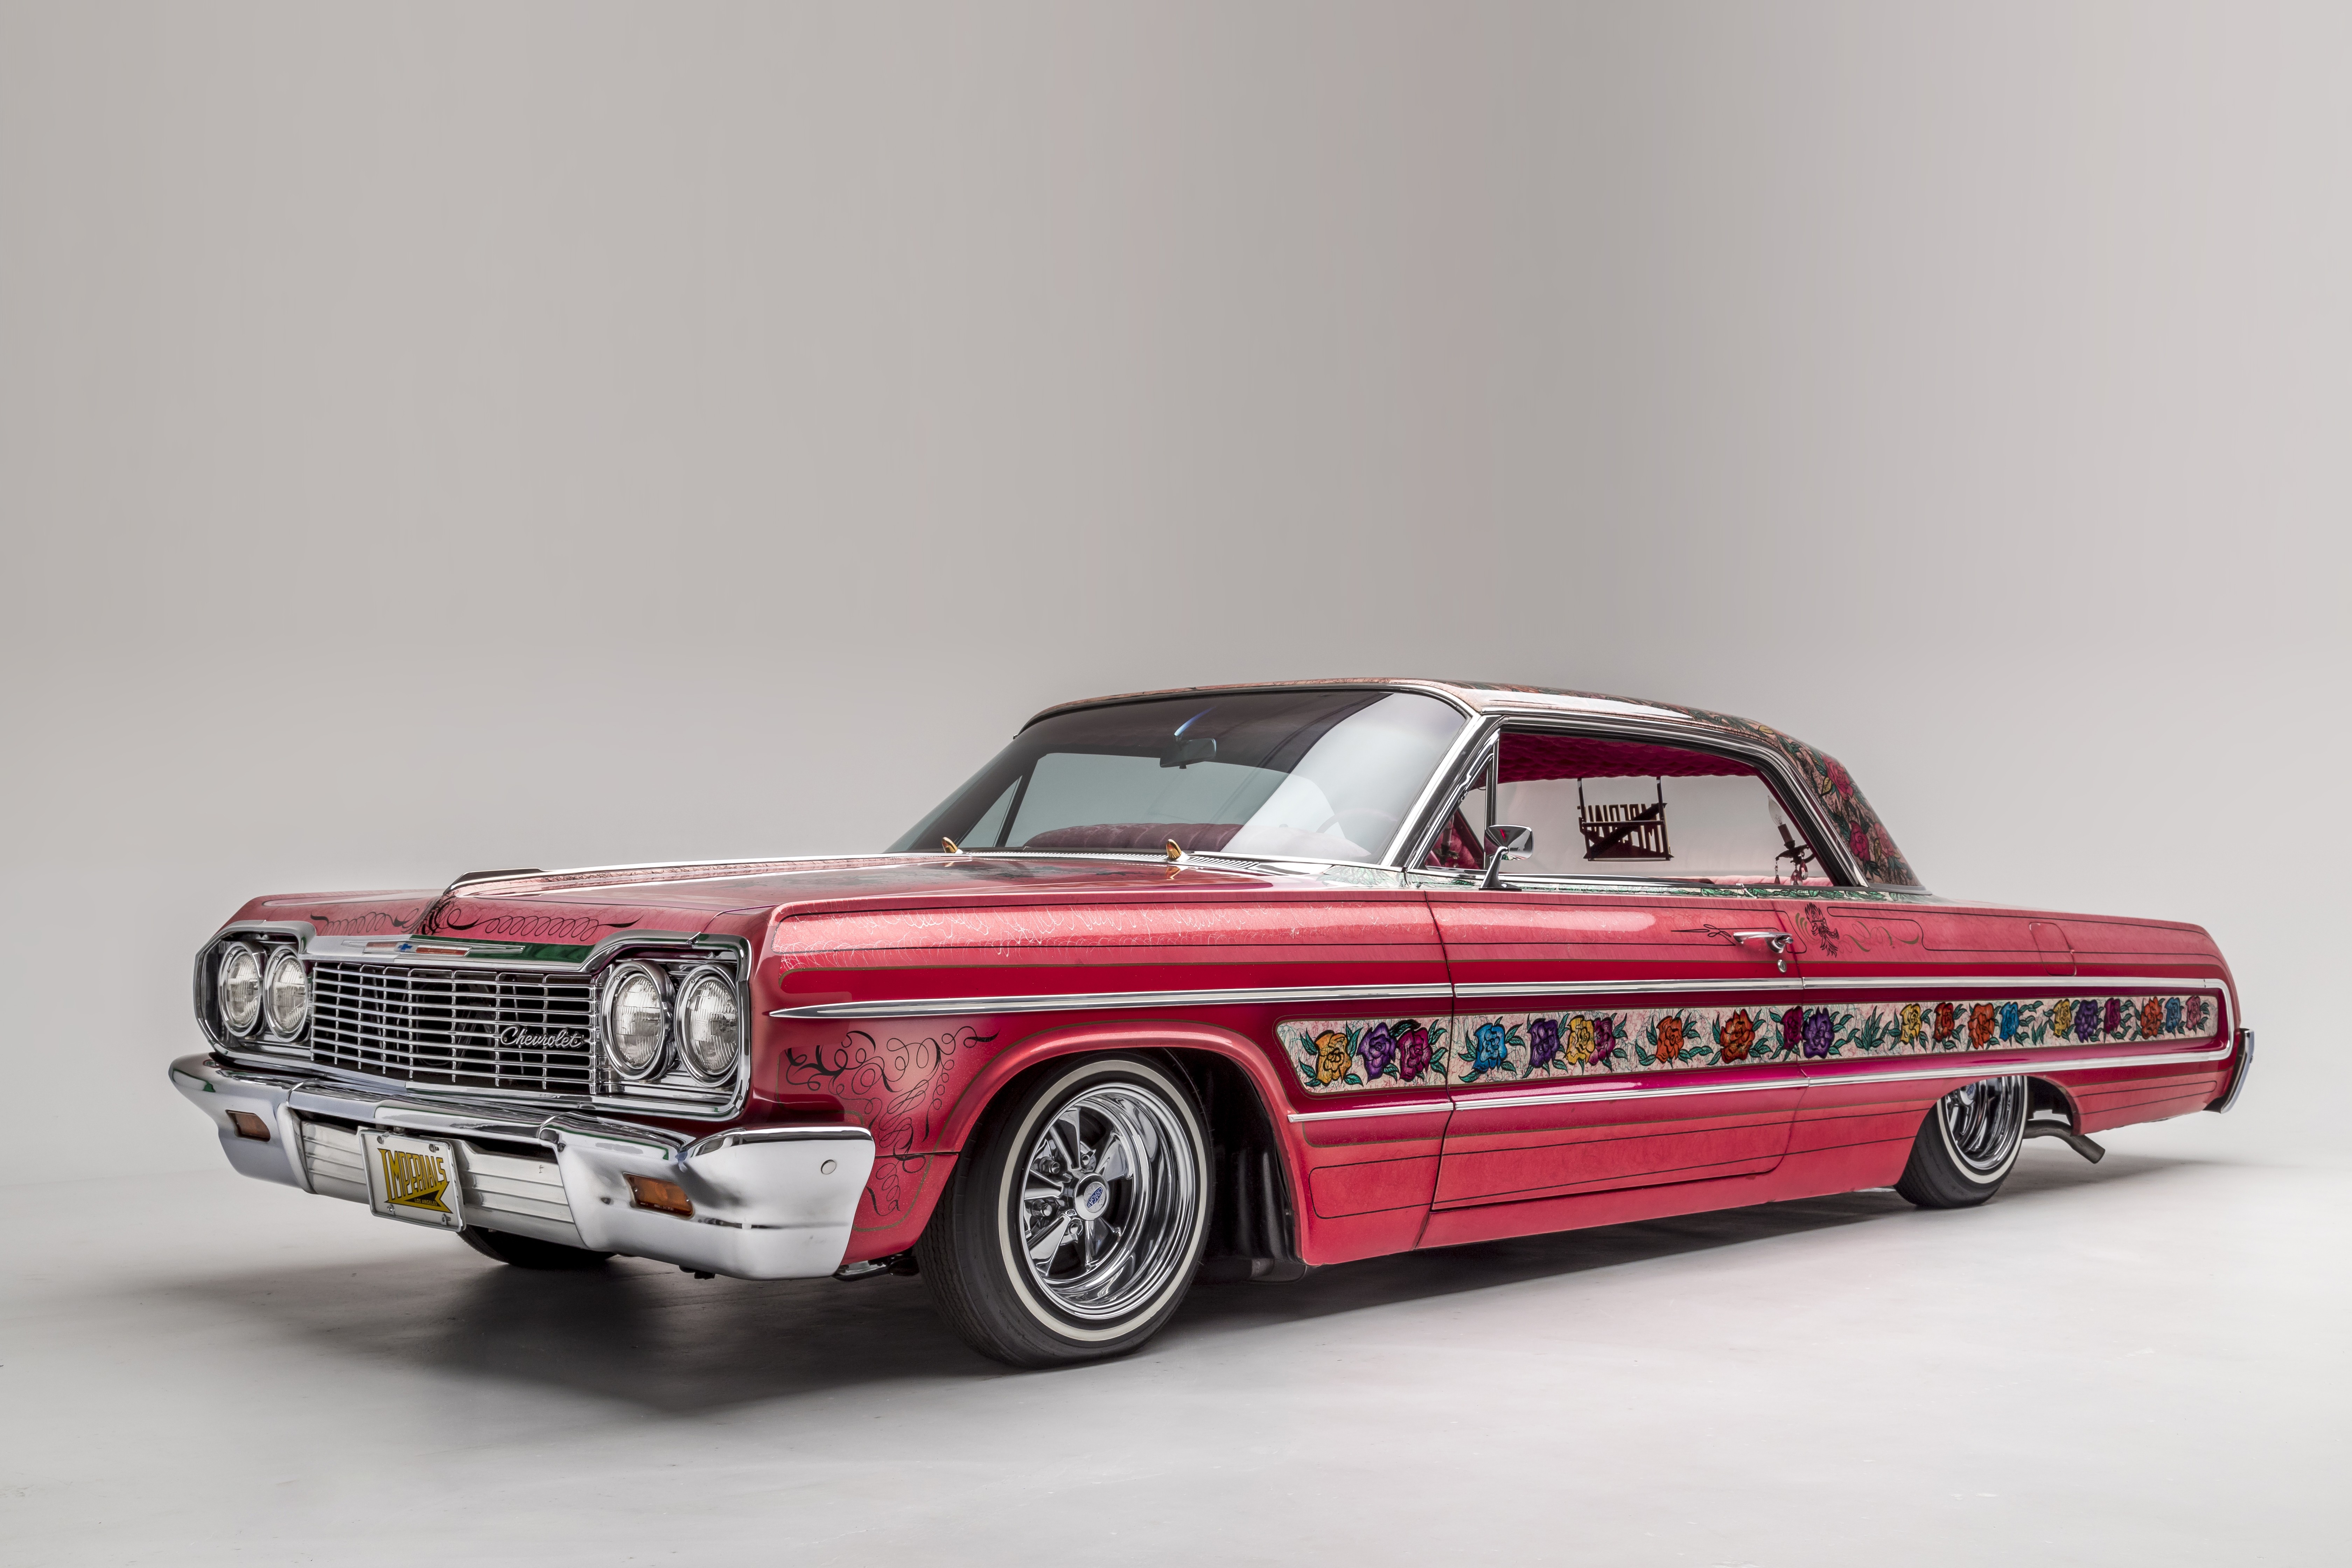 Petersen Automotive Welcomes Largest Lowrider Exhibit in the Museum's History